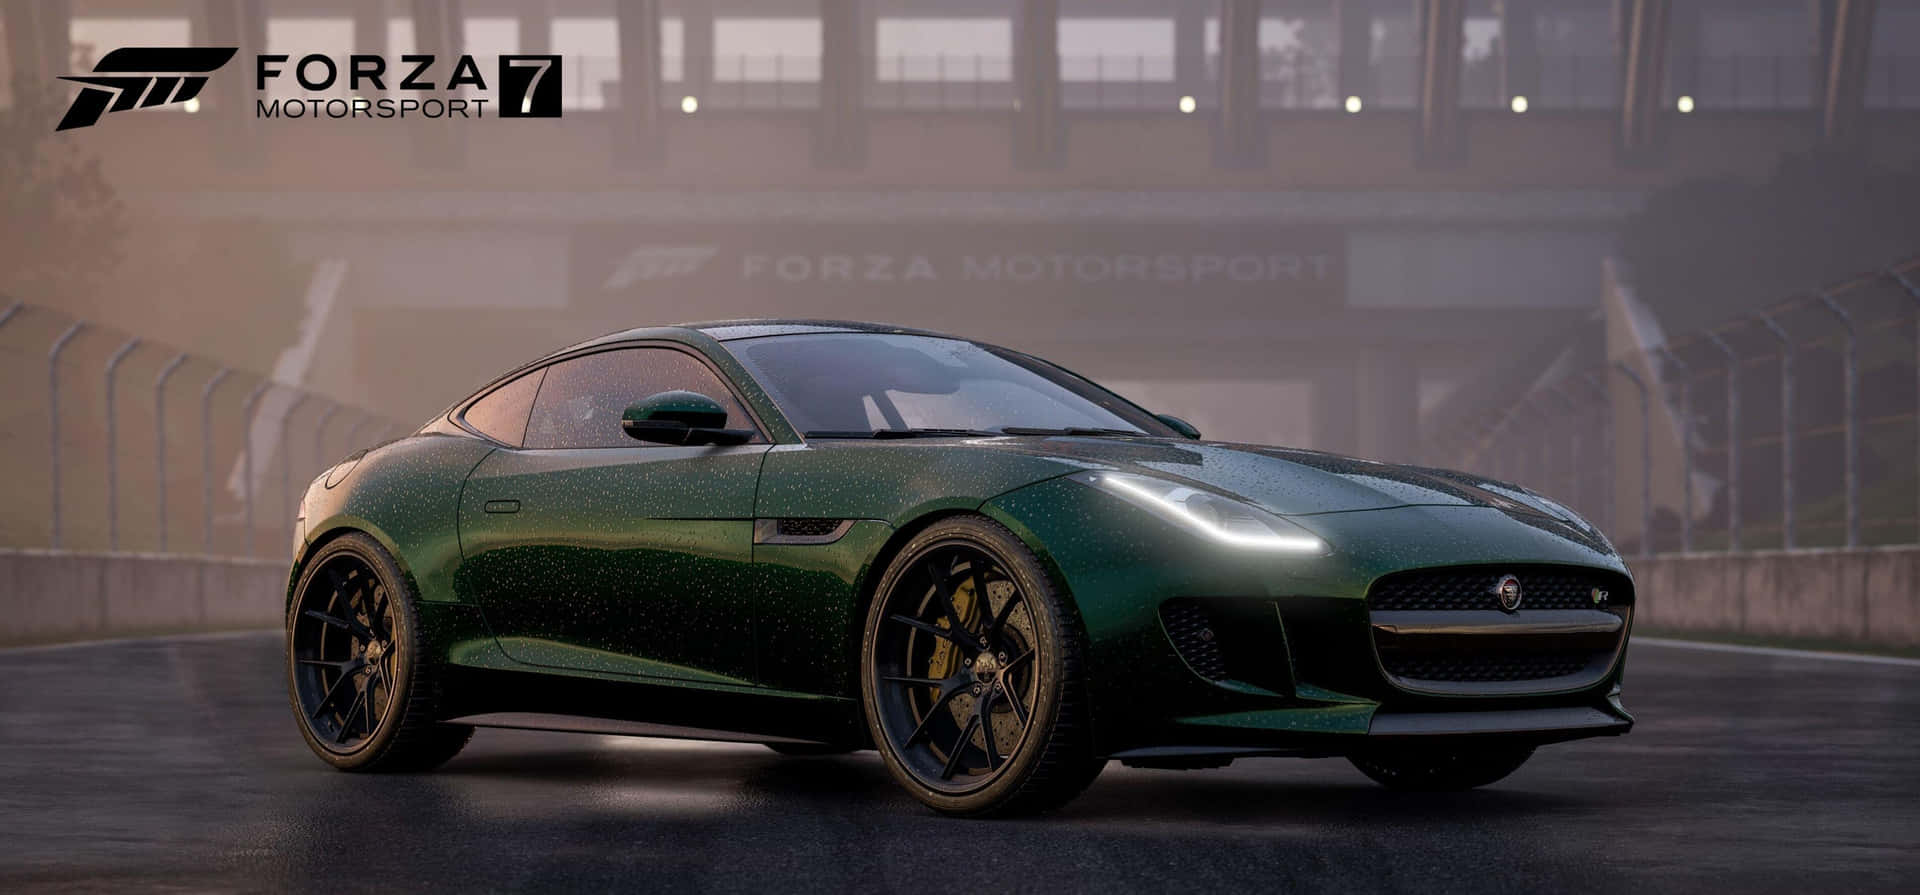 The Jaguar F-type Is Driving On The Track